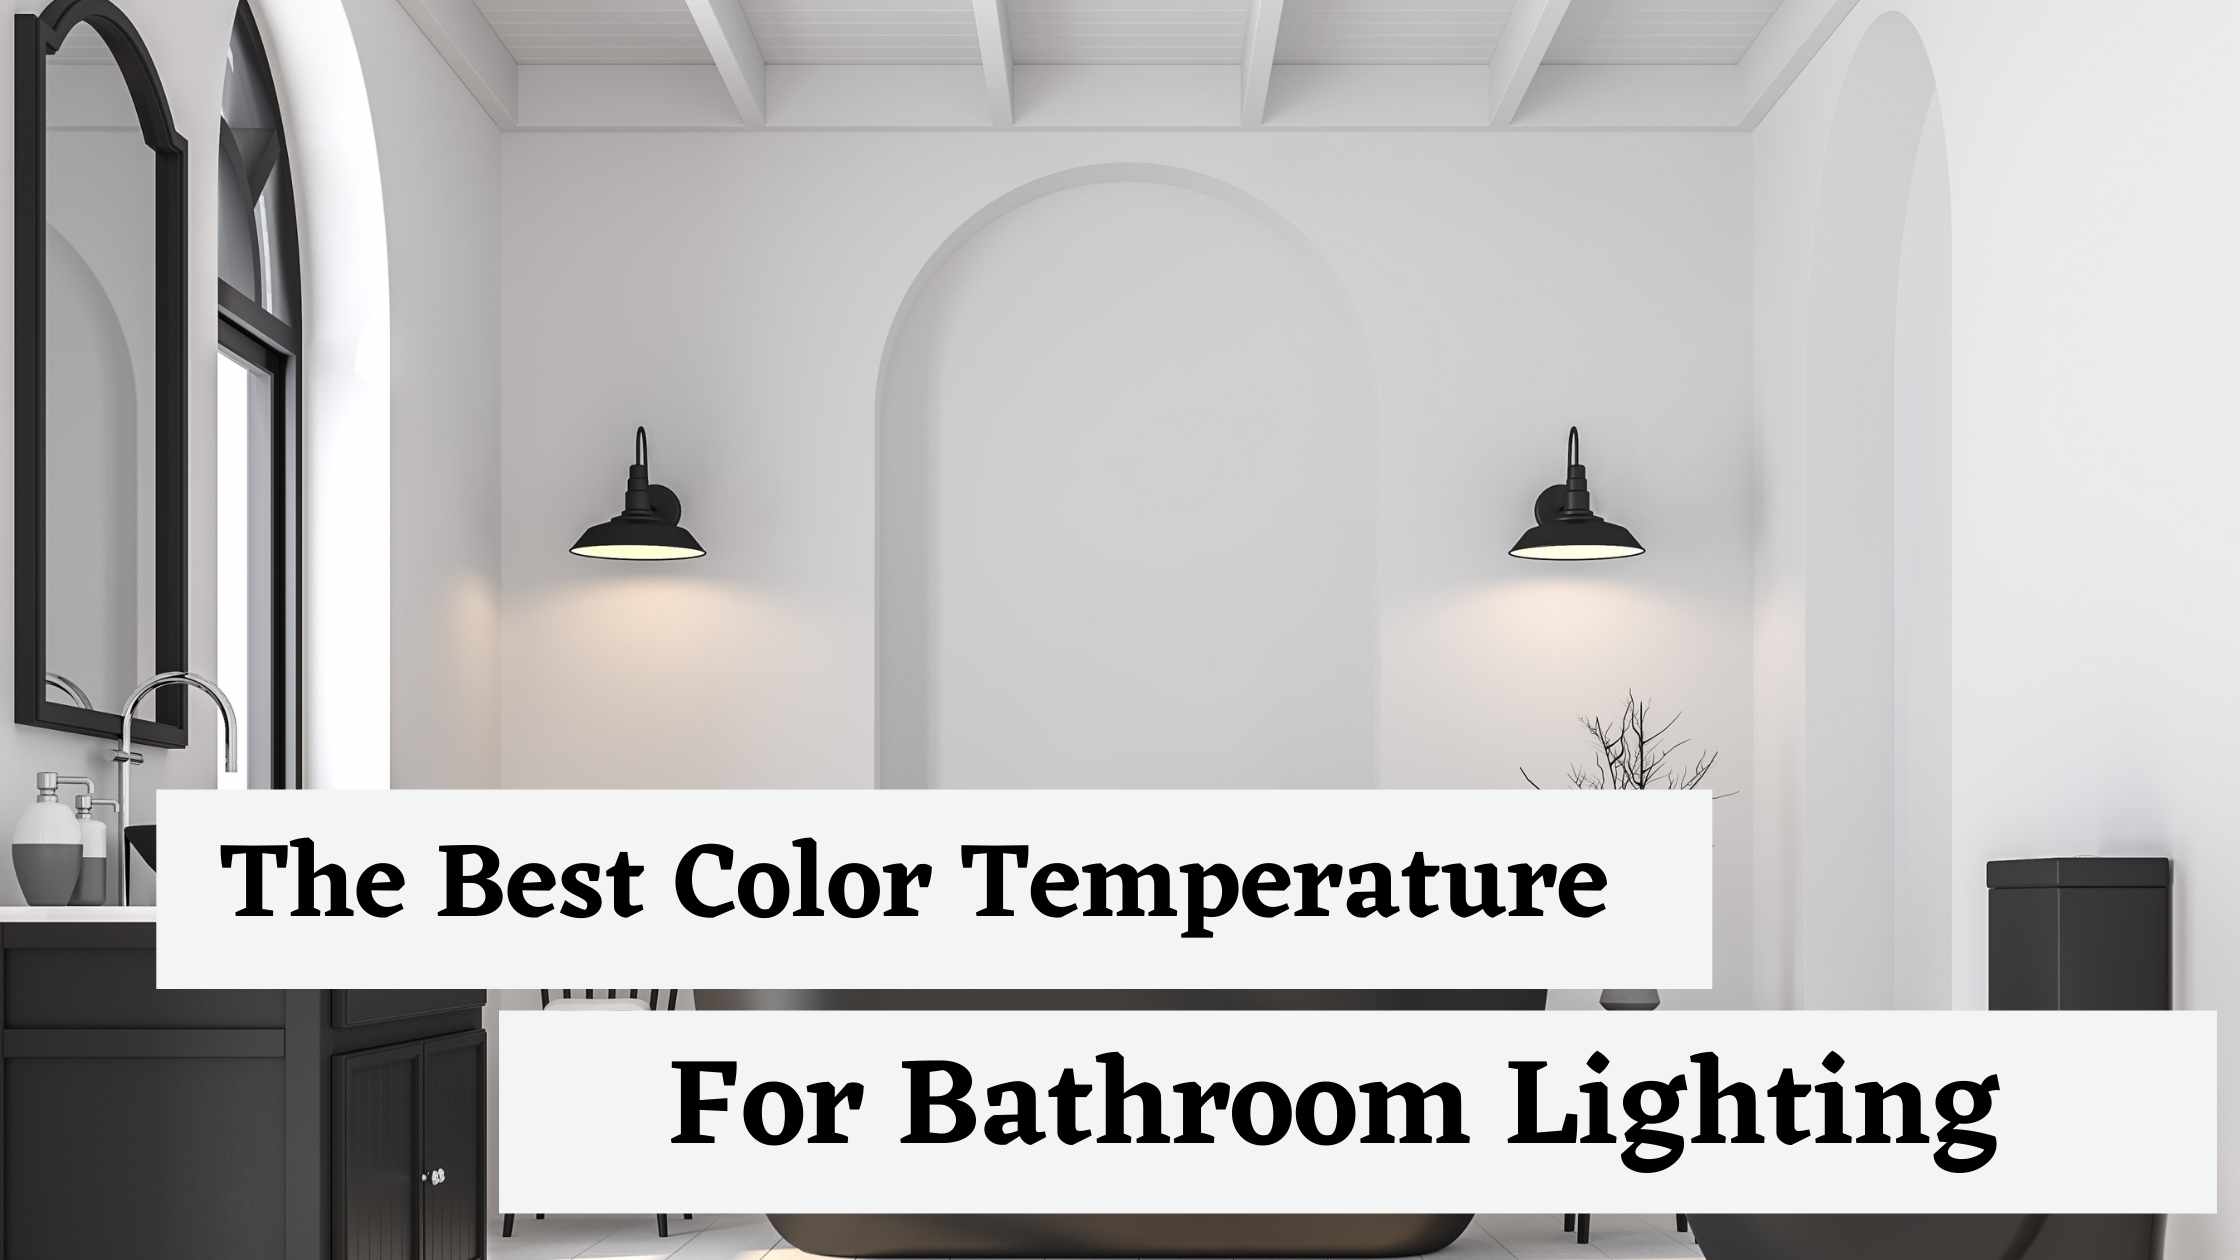 The Best Color Temperature For Bathroom Lighting